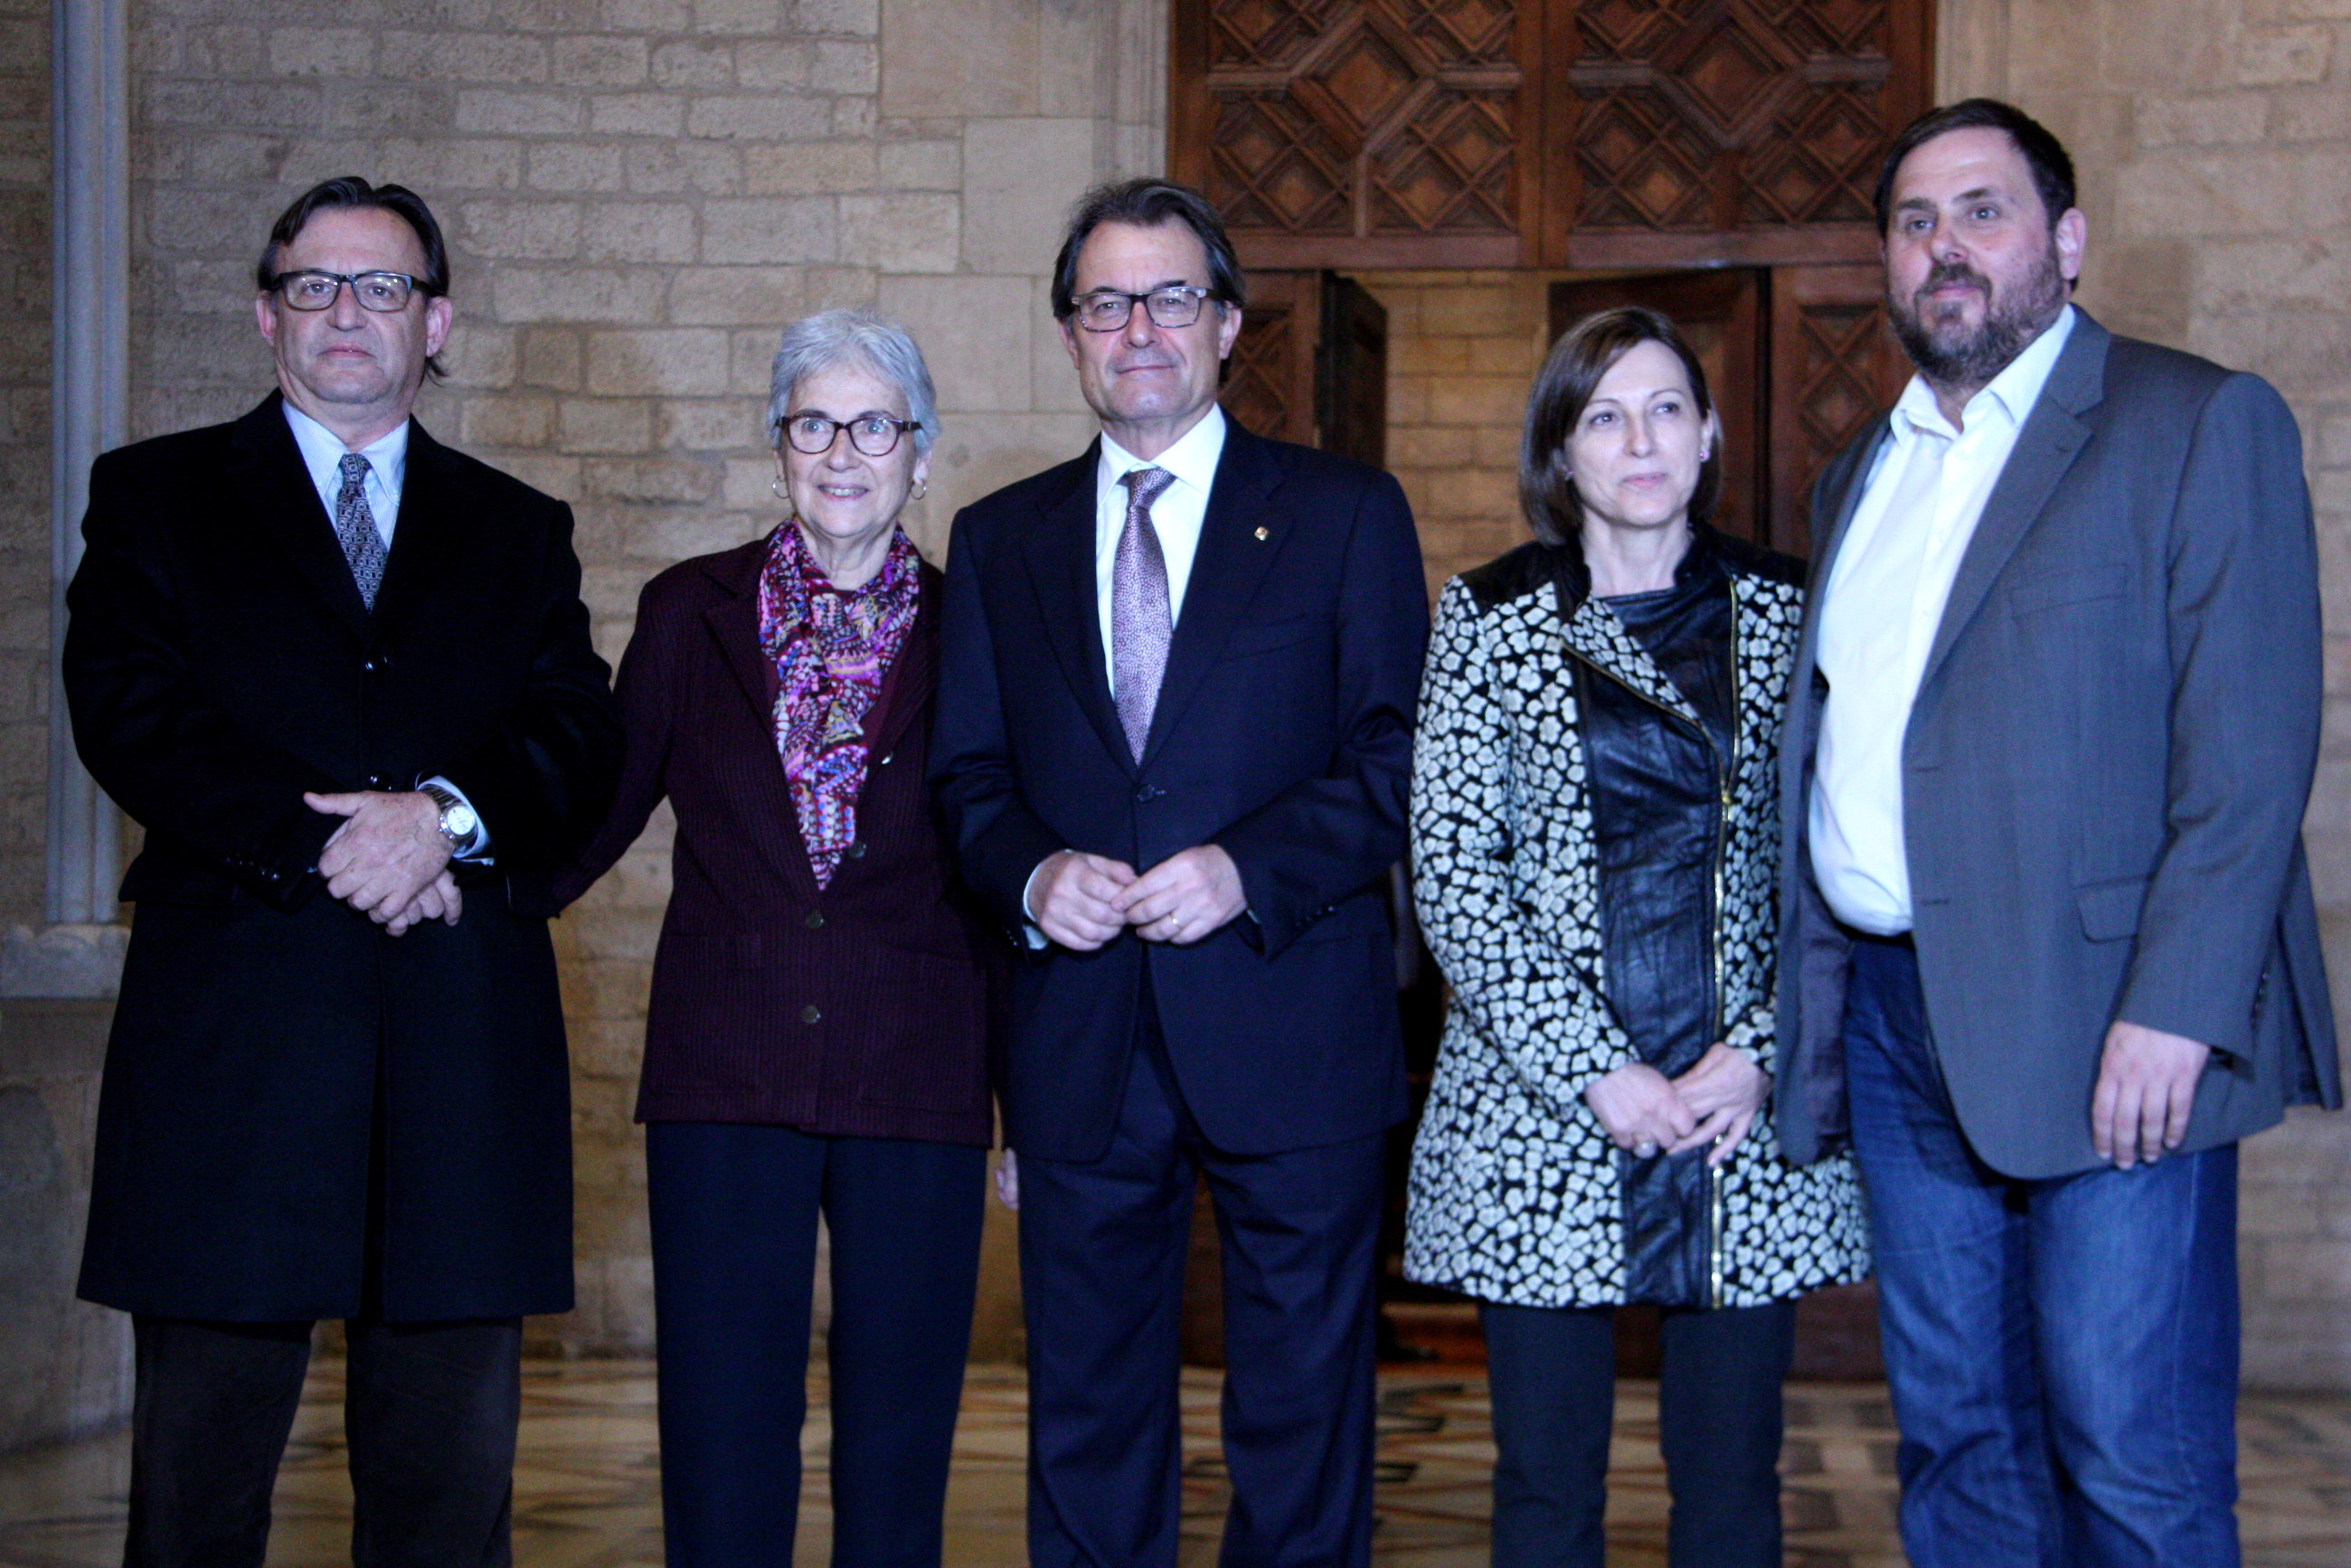 Catalan President Artur Mas and ERC leader Oriol Junqueras, with the presidents of the AMI, Òmnium Cultural and the ANC (by ACN)